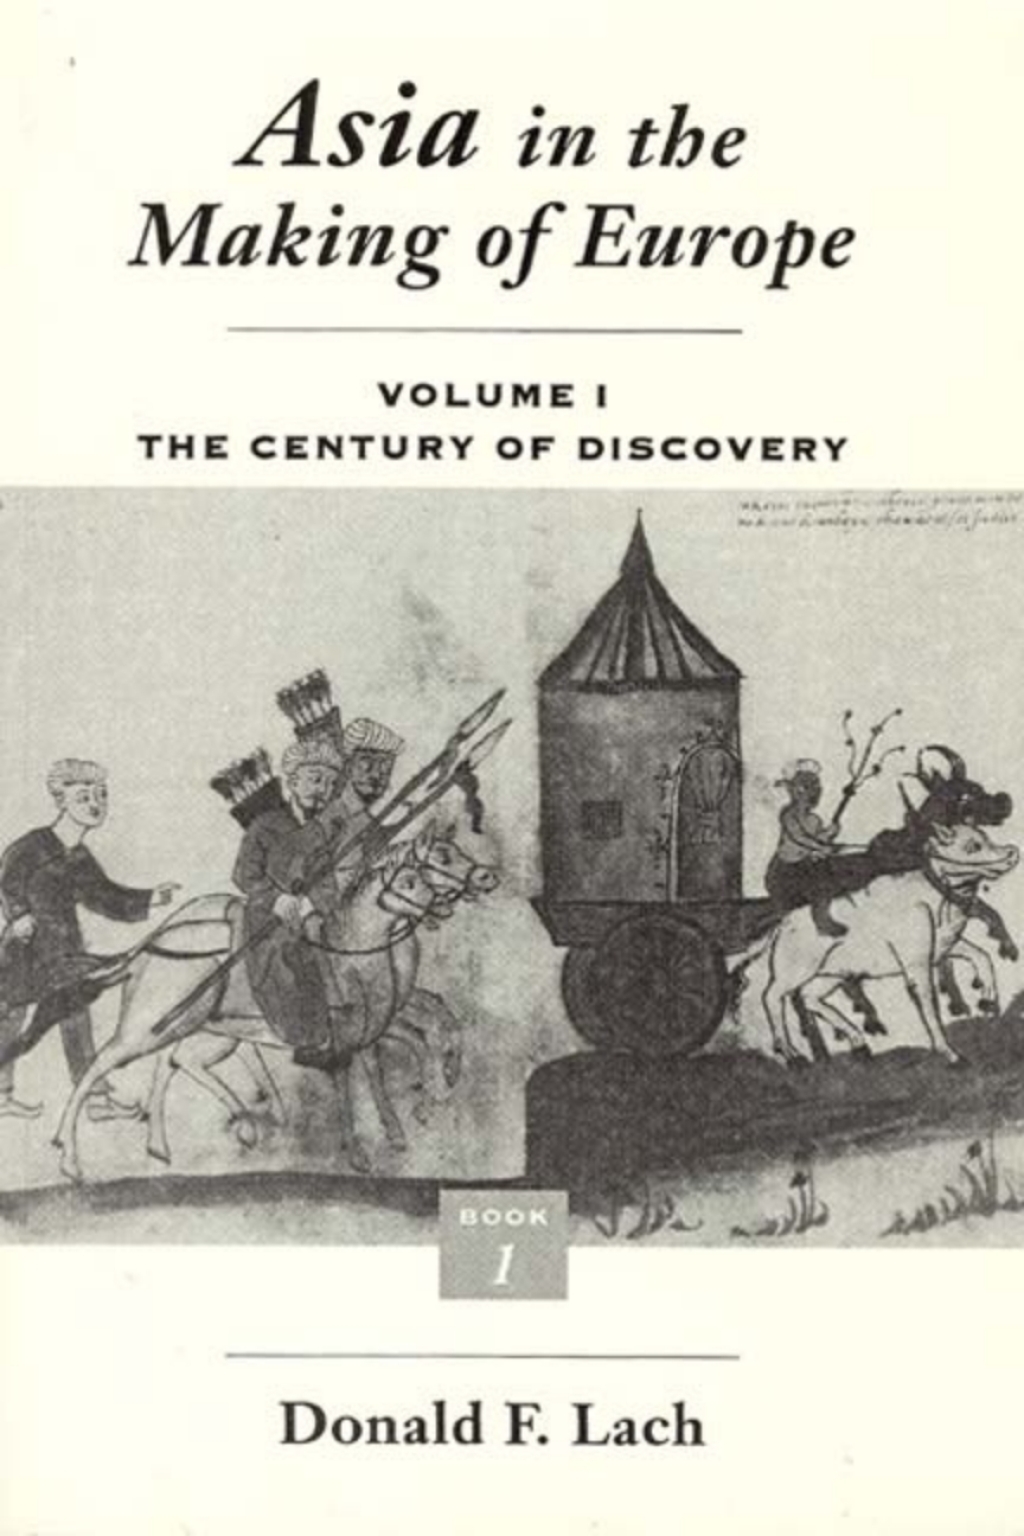 Asia in the Making of Europe  Volume I: The Century of Discovery. Book 1. (eBook) - Donald F. Lach